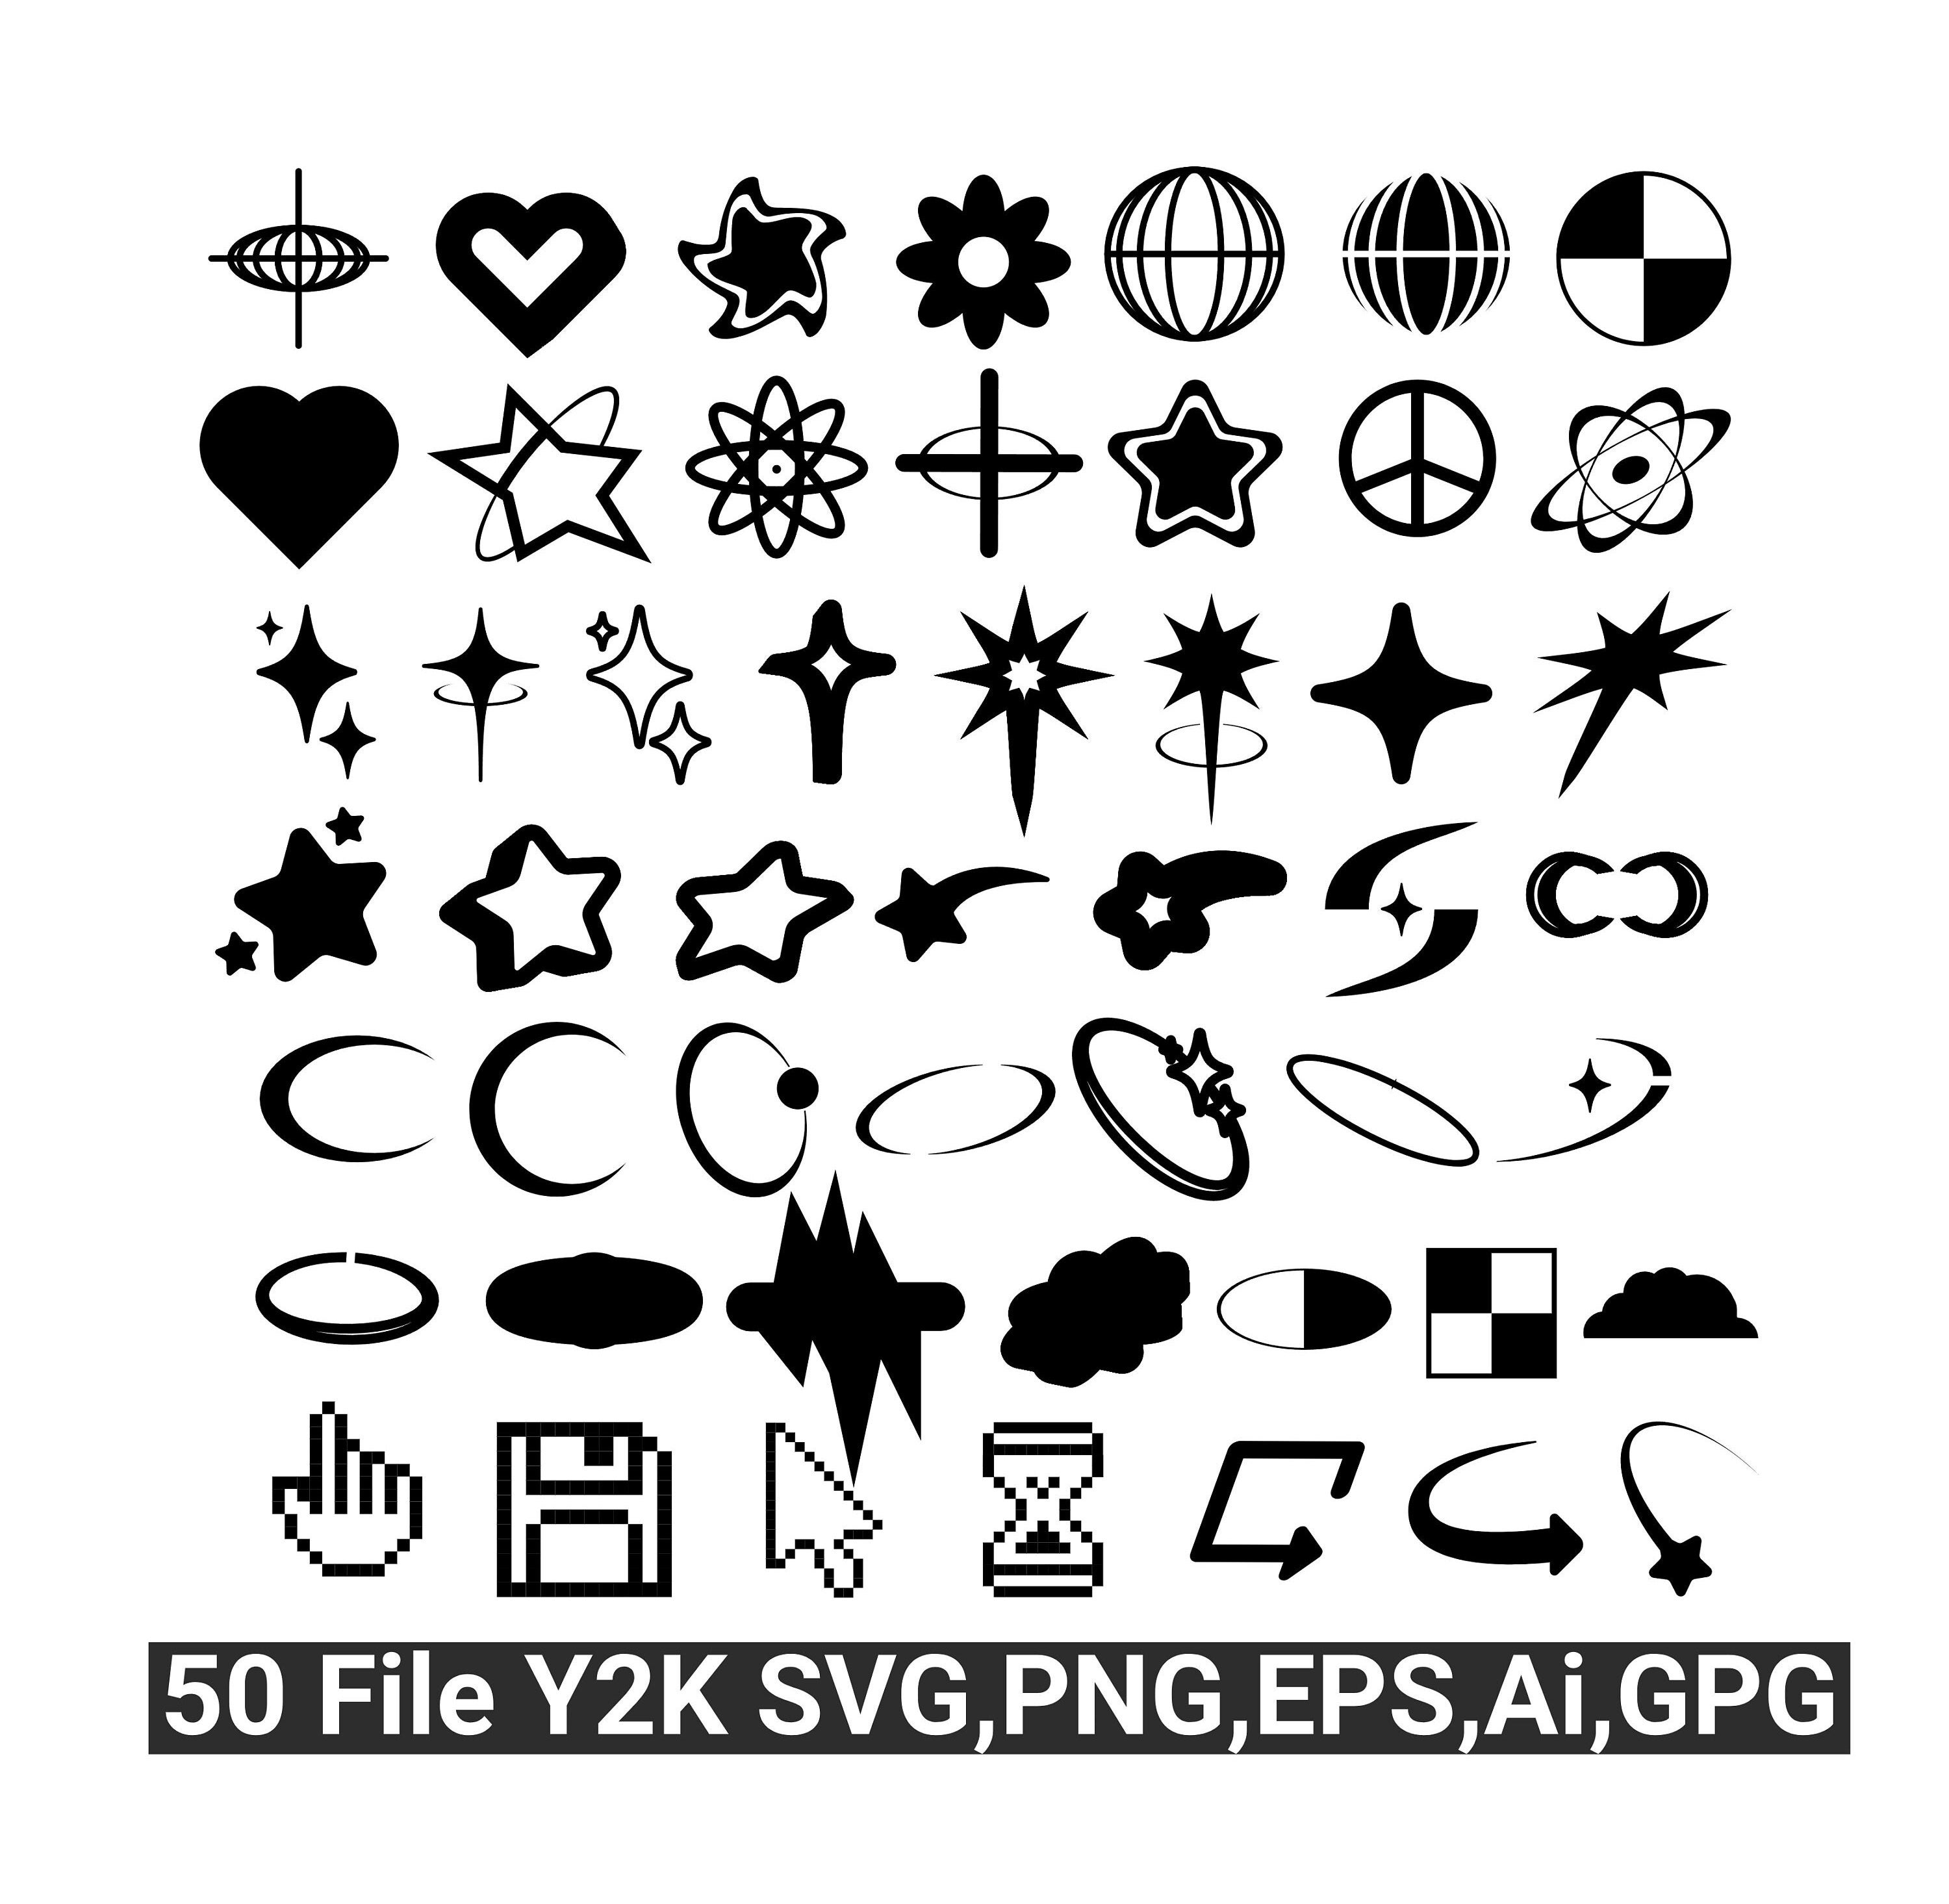 2K Attributes 50 File Svg , 50 Eps , 50 Ai , 50 Png , 50 Gpg - Etsy